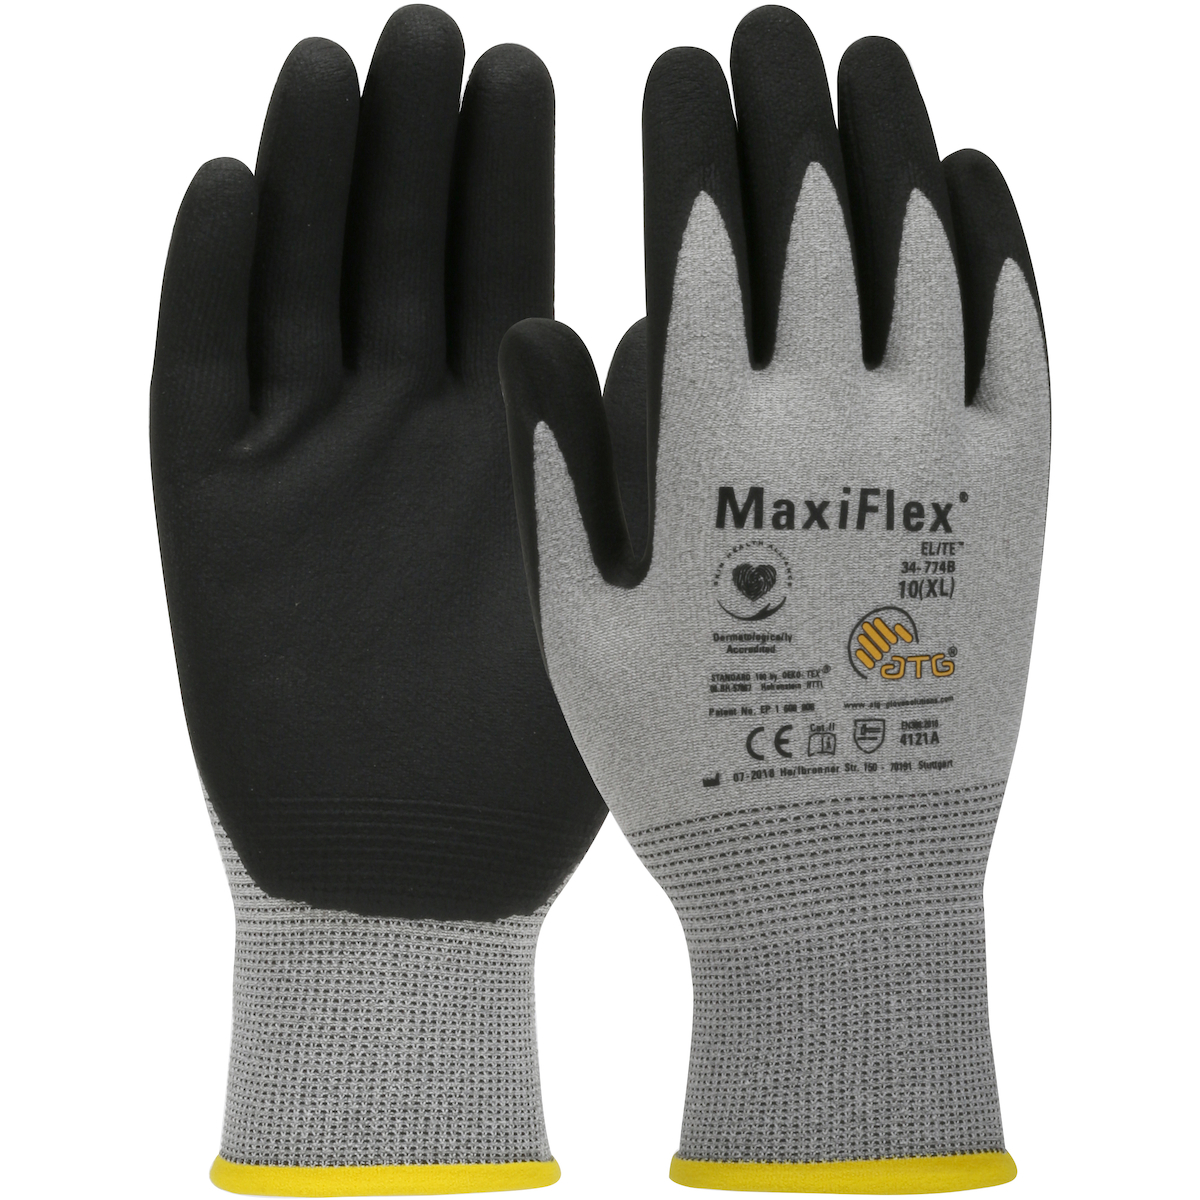 ULTRA LIGHT WEIGHT SEAMLESS KNIT NYLON GLOVE WITH NITRILE COATED MICROFOAM GRIP ON PALM & FINGERS - TOUCHSCREEN COMPATIBLE